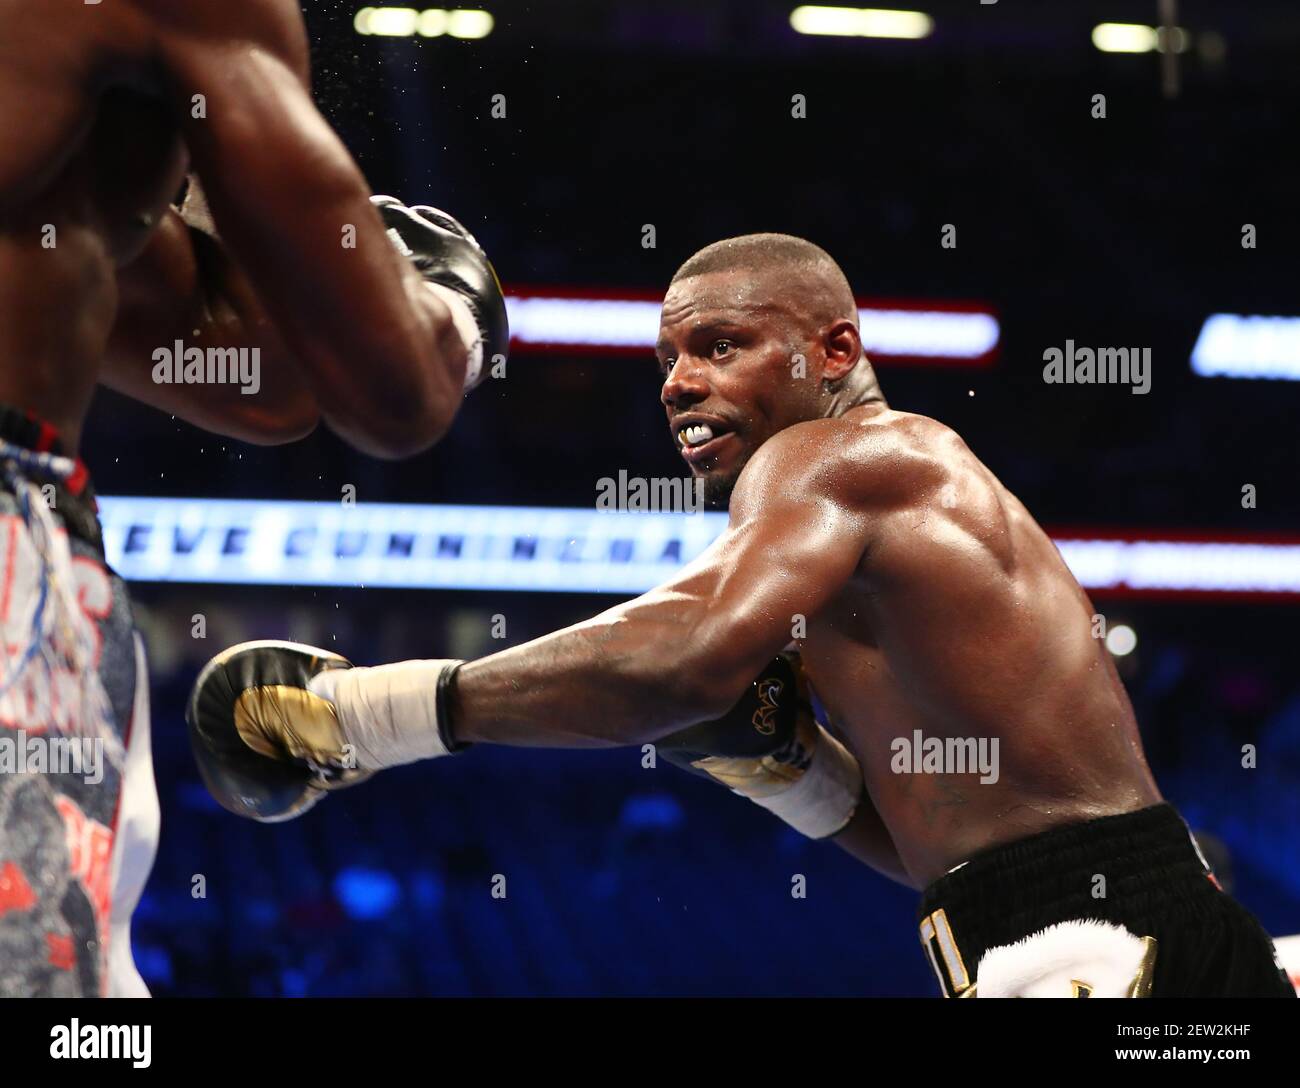 Aug 26, 2017; Las Vegas, NV, USA; Andrew Tabiti fights against Steve Cunningham during a boxing match at T-Mobile Arena. Mandatory Credit: Mark J. Rebilas-USA TODAY Sports Stock Photo